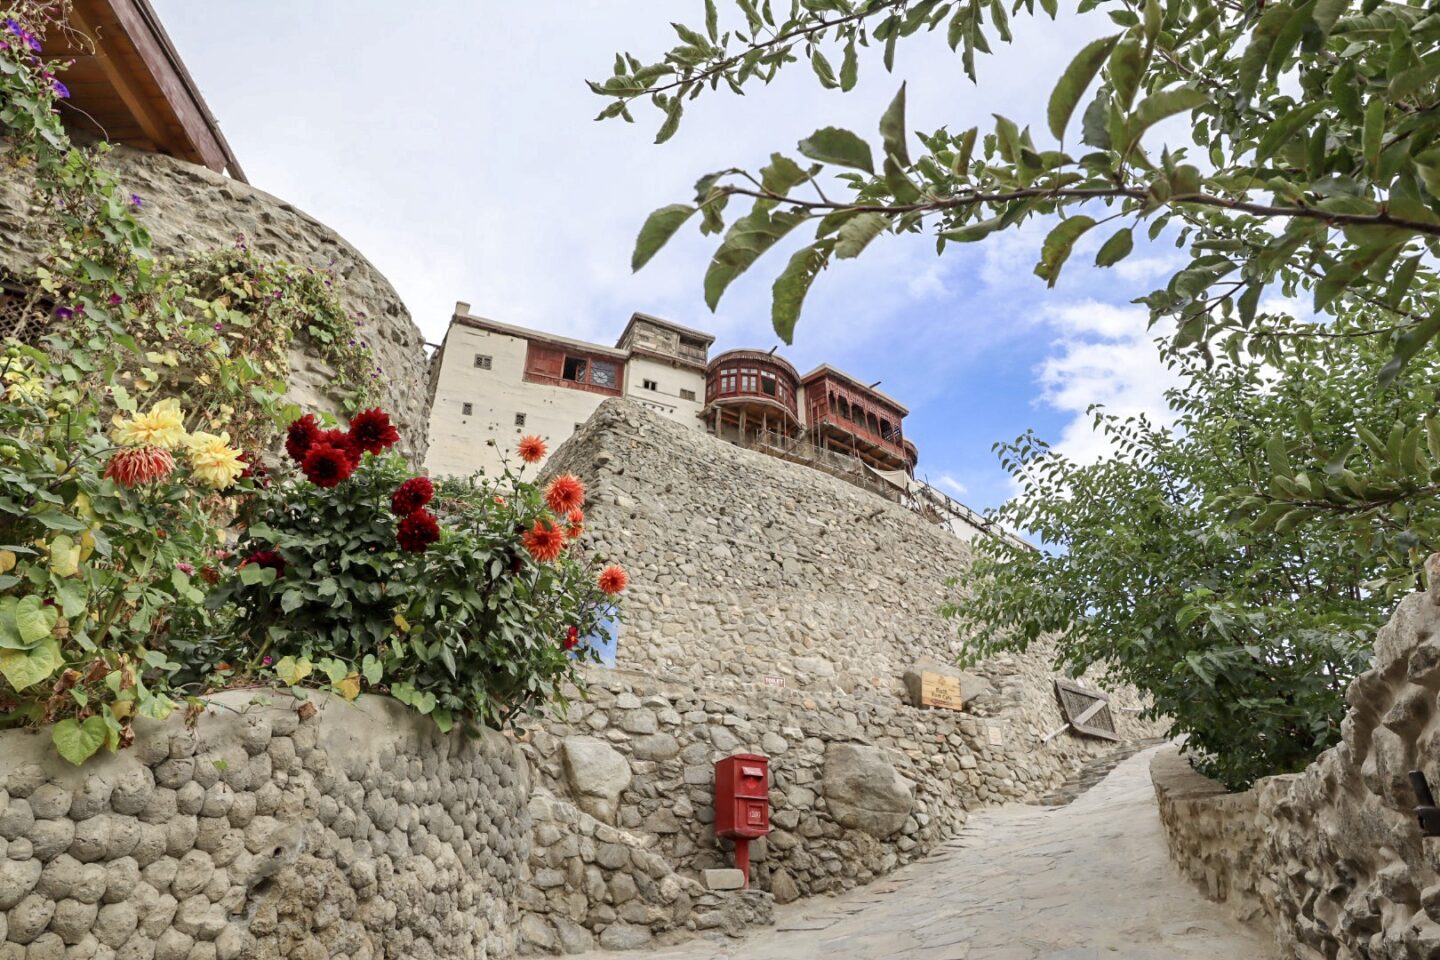 Pakistan itinerary, Baltit Fort and Flowers